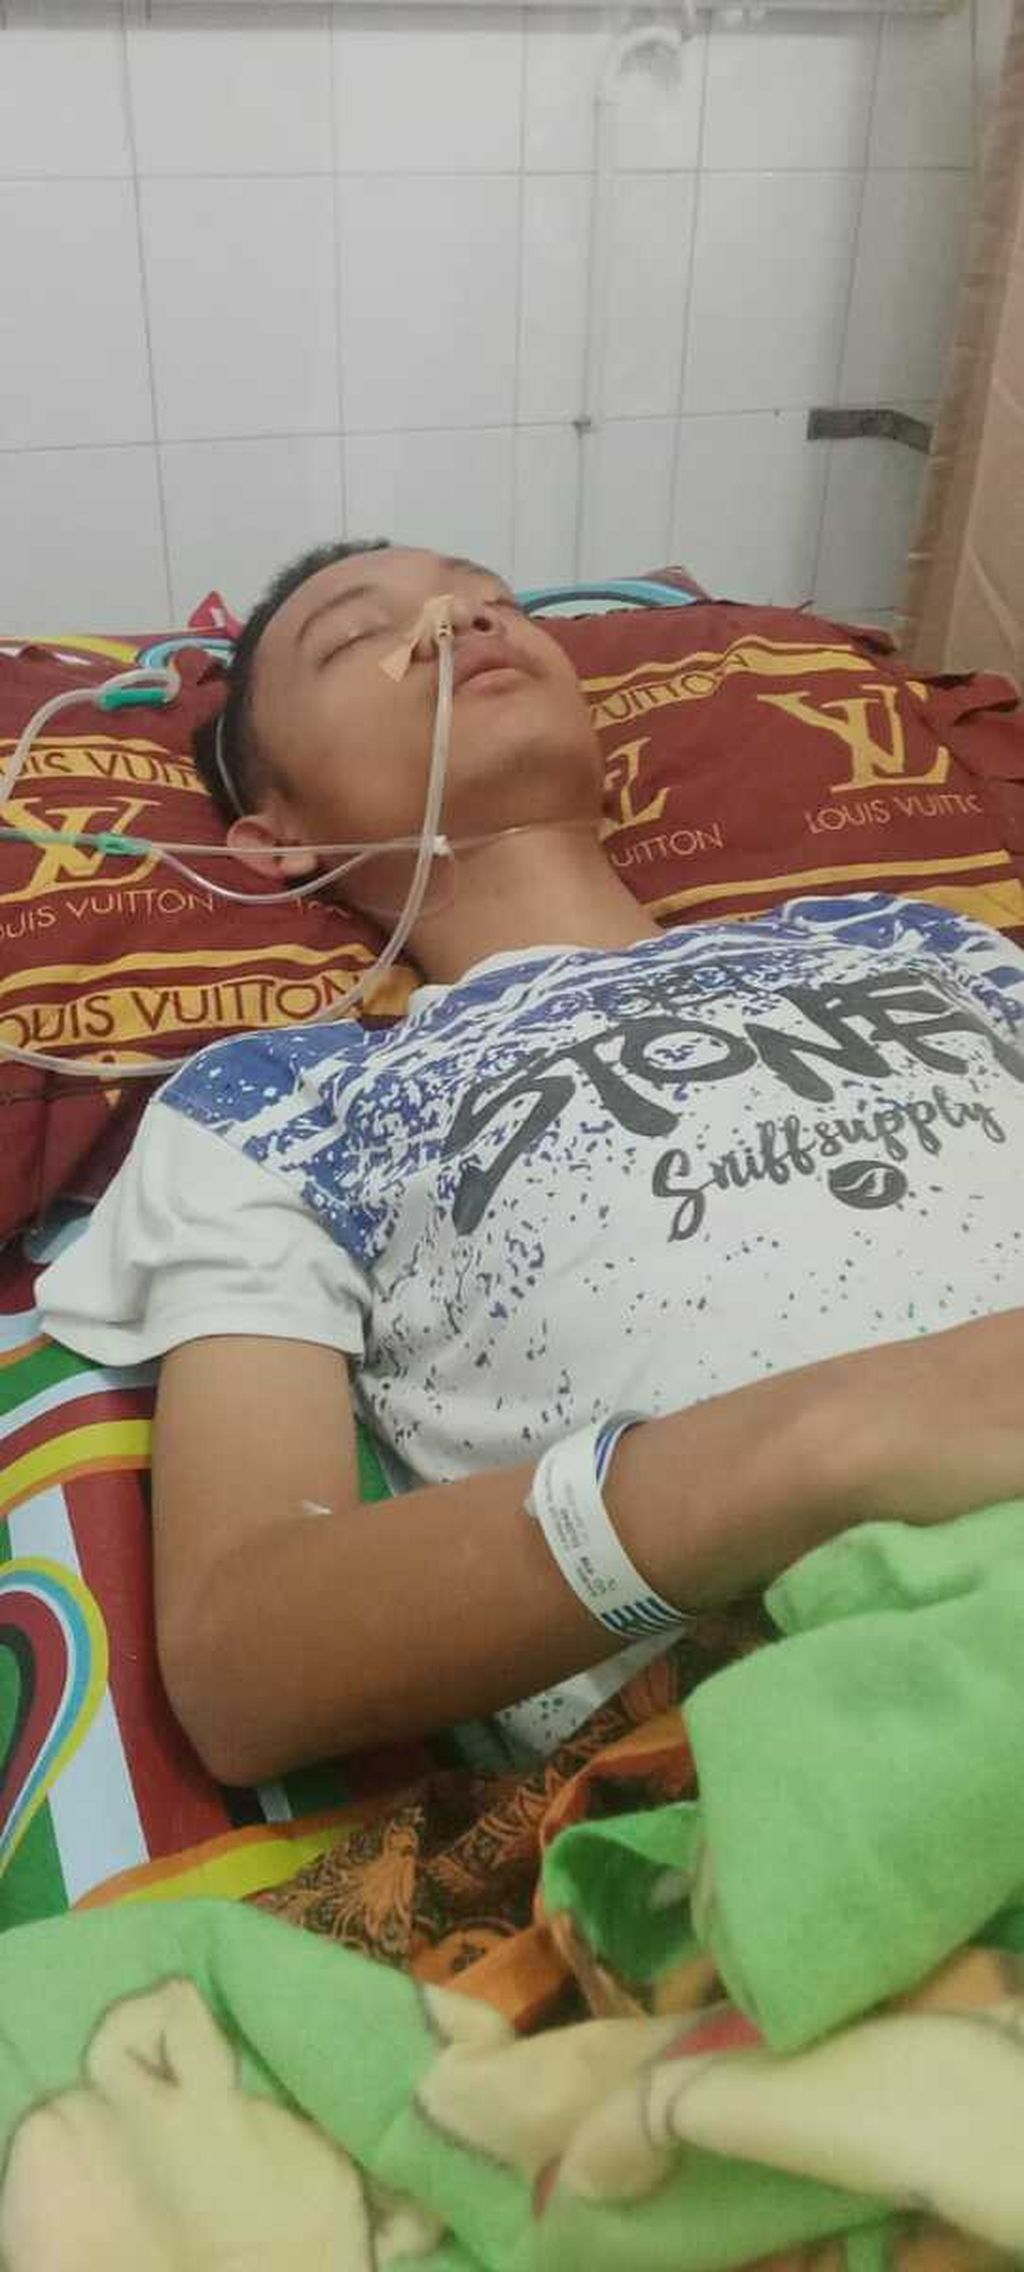 Yaredi (17), a student in South Nias, North Sumatra, who died after being hit by the school principal,